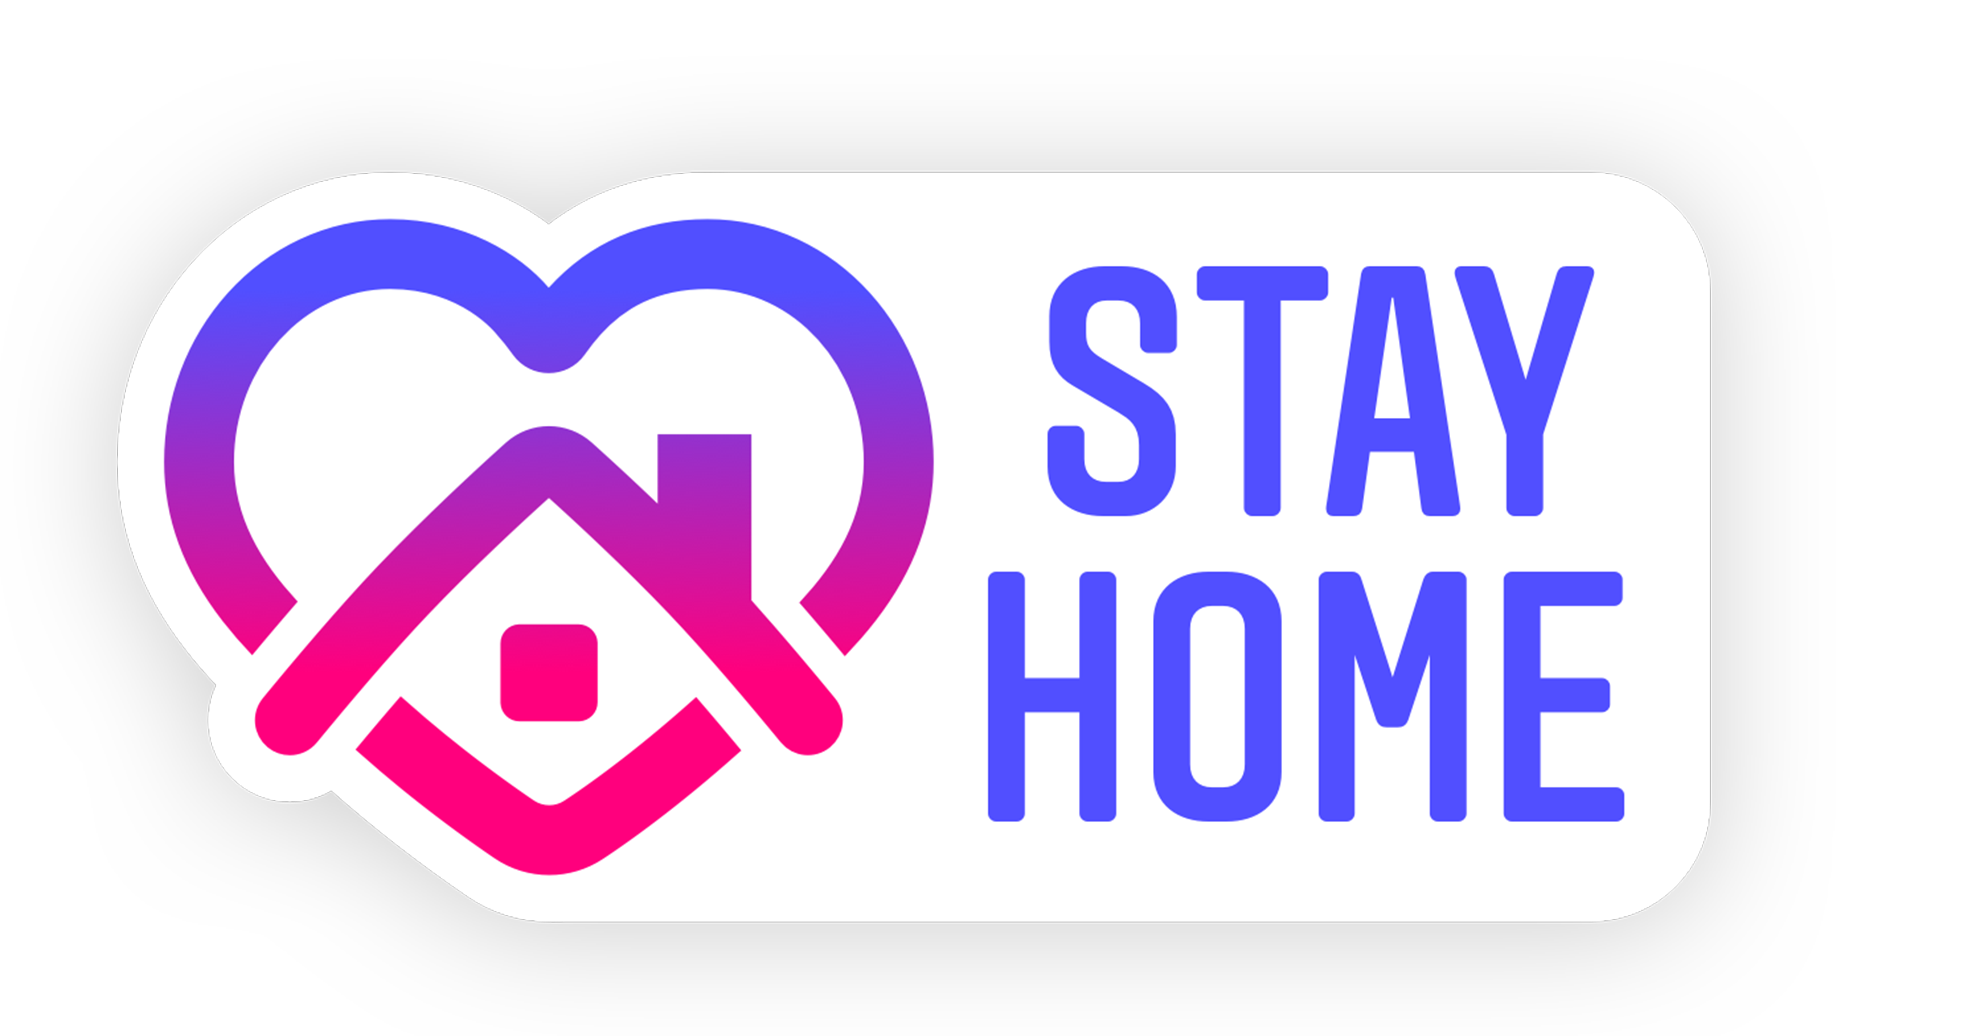 Stay Home sticker - Instagram coronavirus response: feature to browse photos together via video chat and ‘Stay Home’ sticker